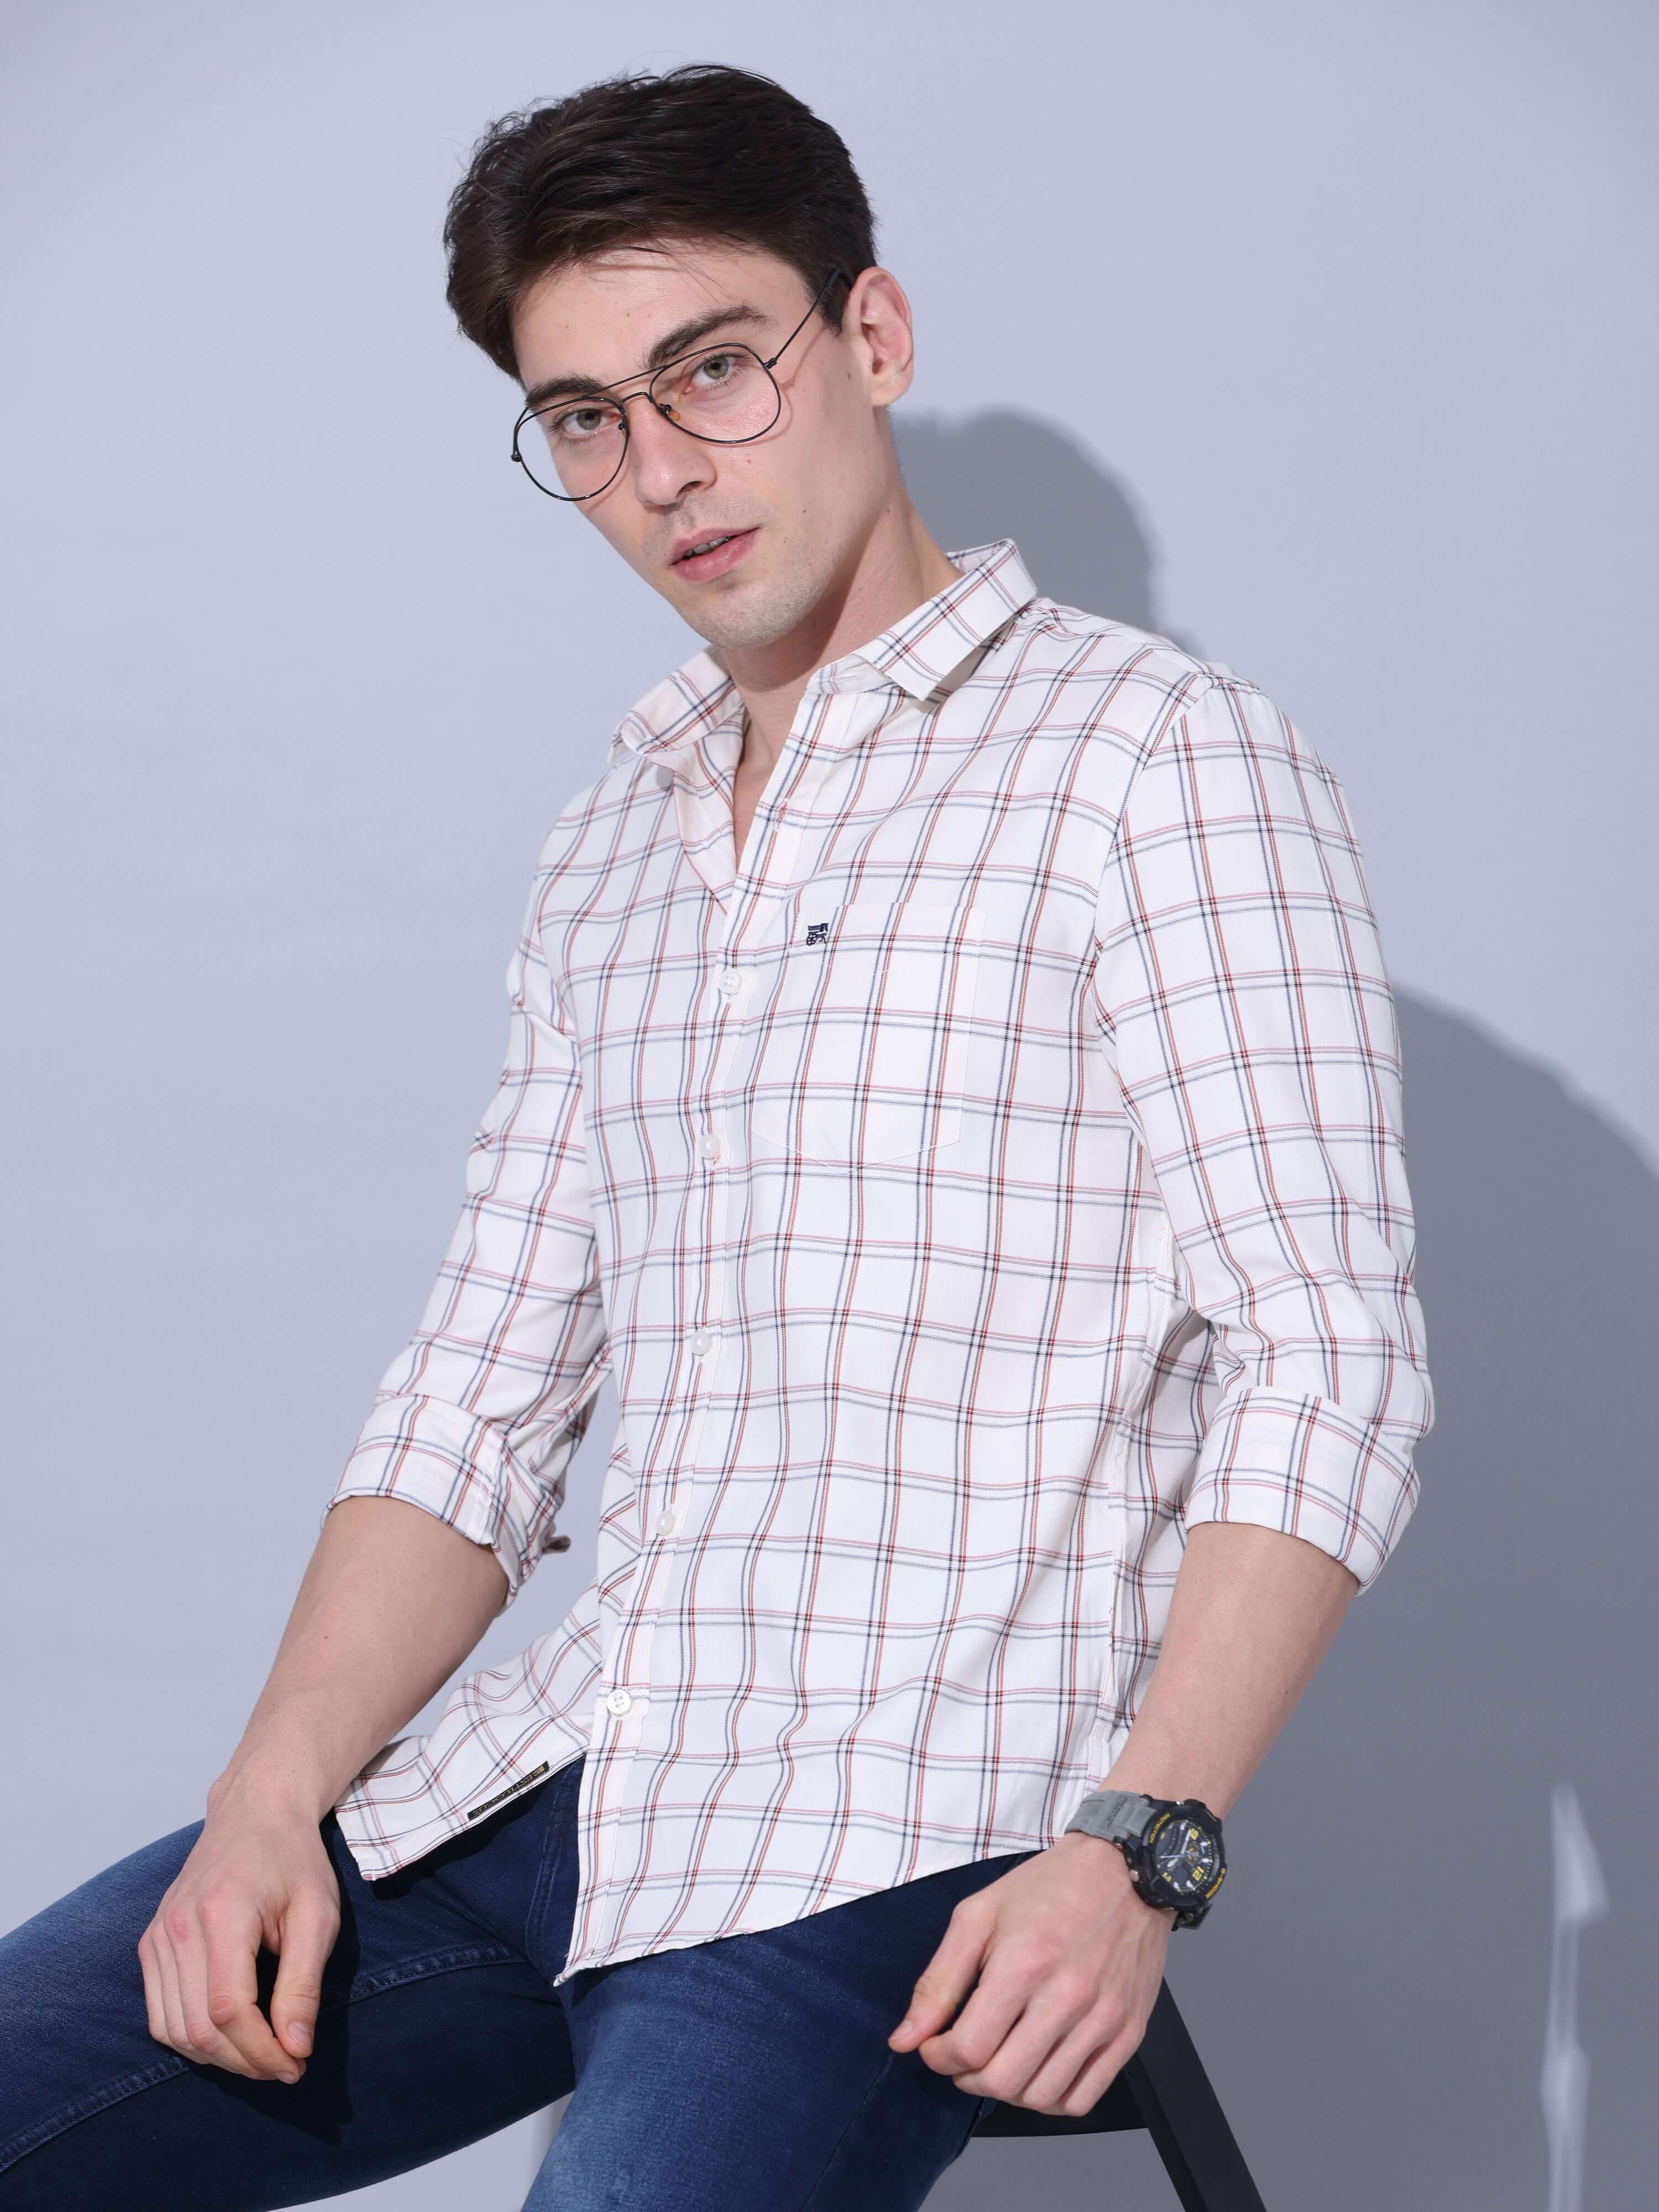 White Check Casual Shirt shop online at Estilocus. • Full-sleeve check shirt • Cut and sew placket • Regular collar • Double button square cuff. • Single pocket with logo embroidery • Curved hemline • Finest quality sewing • Machine wash care • Suitable t